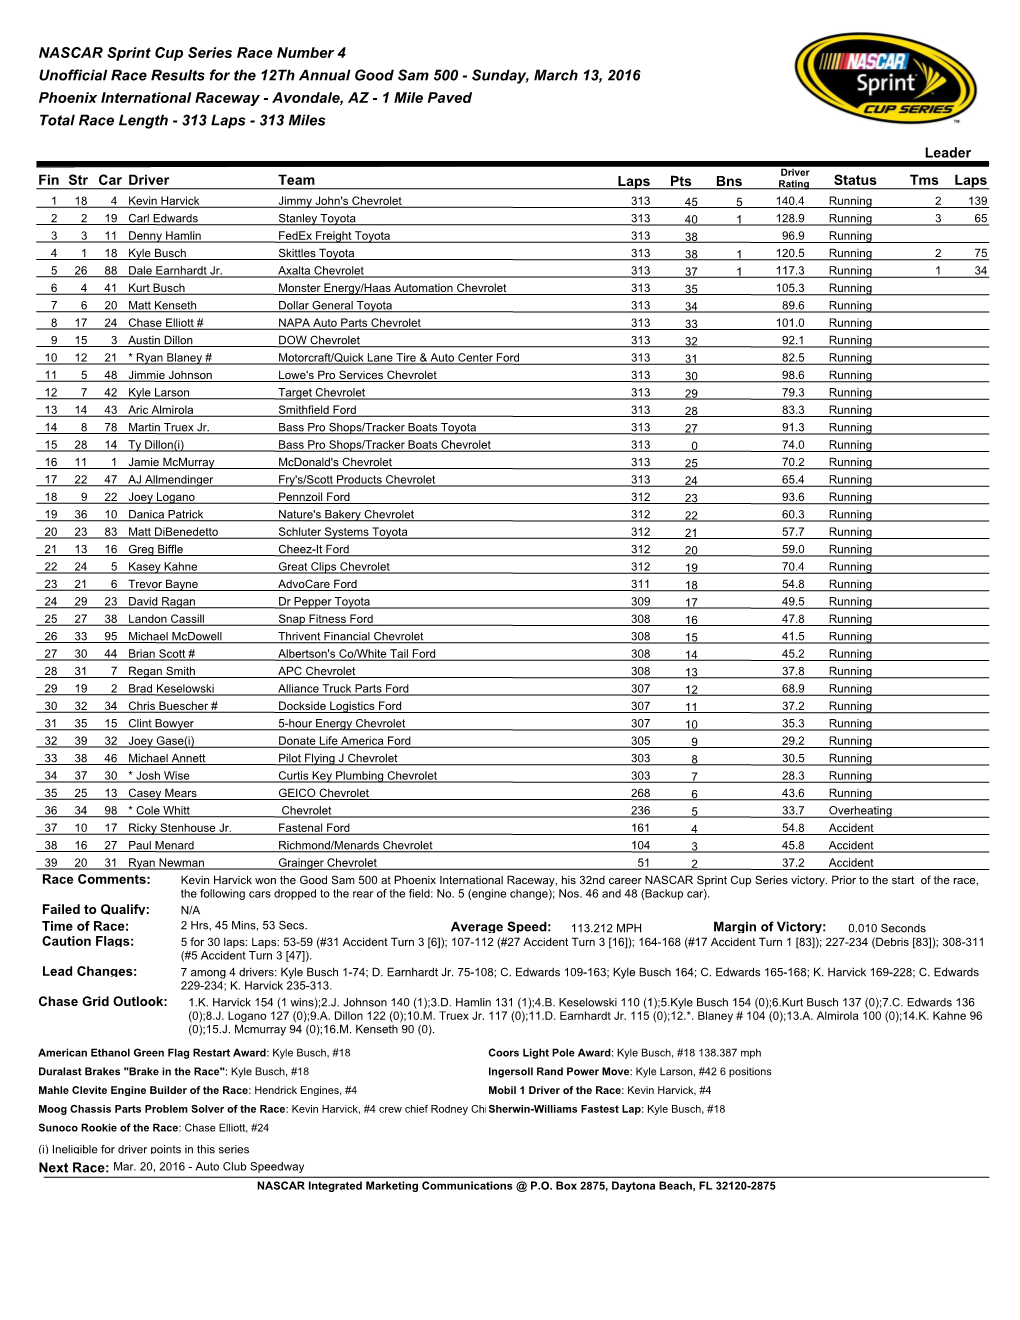 NASCAR Sprint Cup Series Race Number 4 Unofficial Race Results